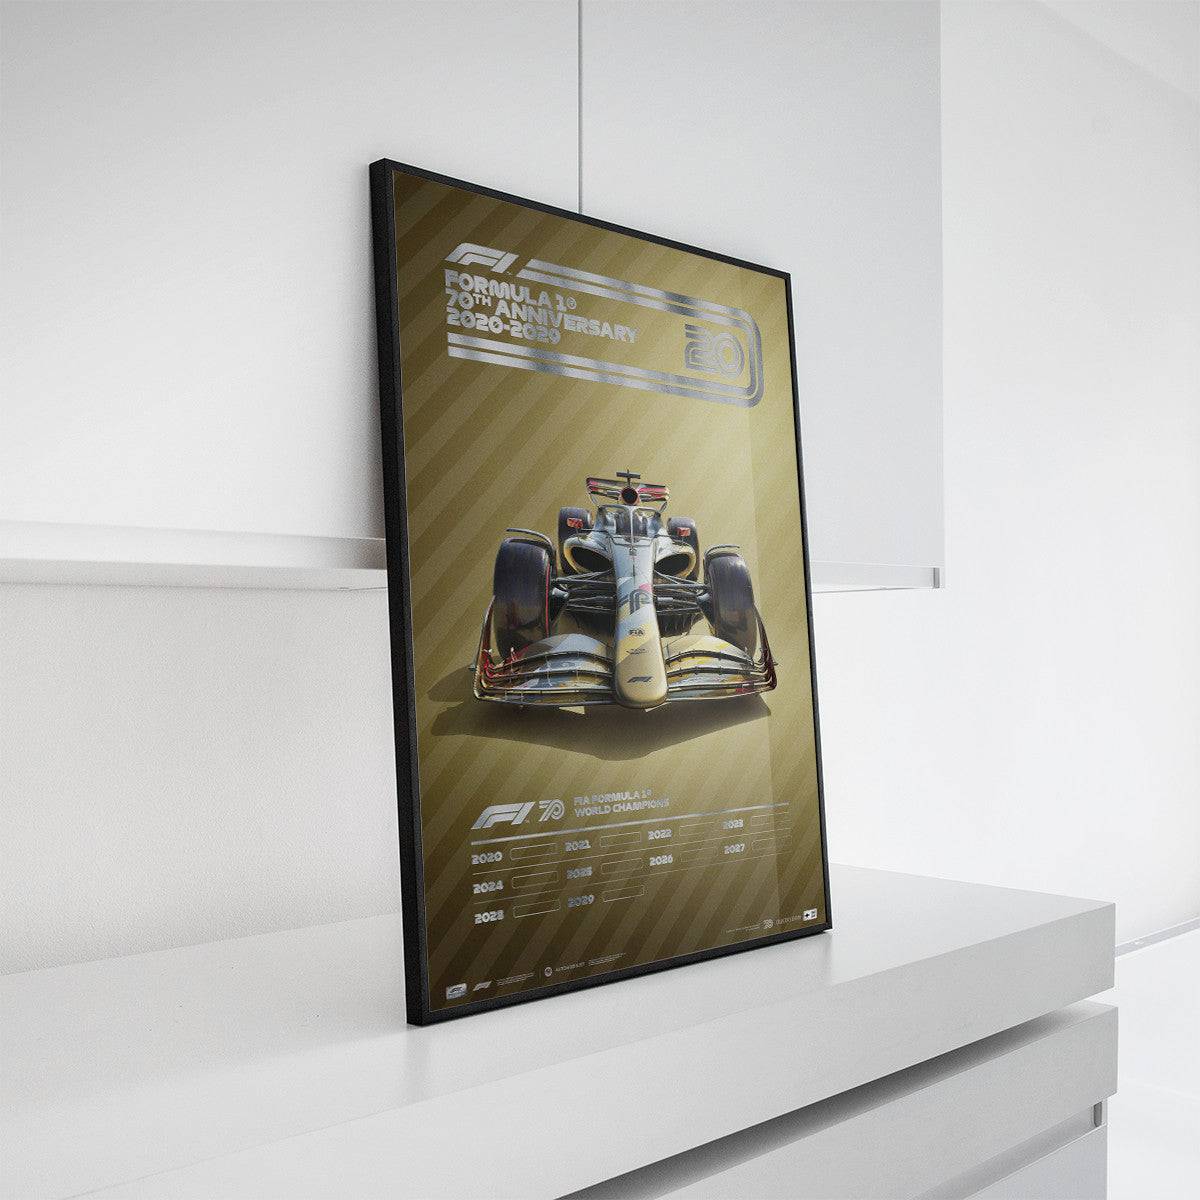 FORMULA 1® DECADES - 2020s THE FUTURE LIES AHEAD | COLLECTOR’S EDITION